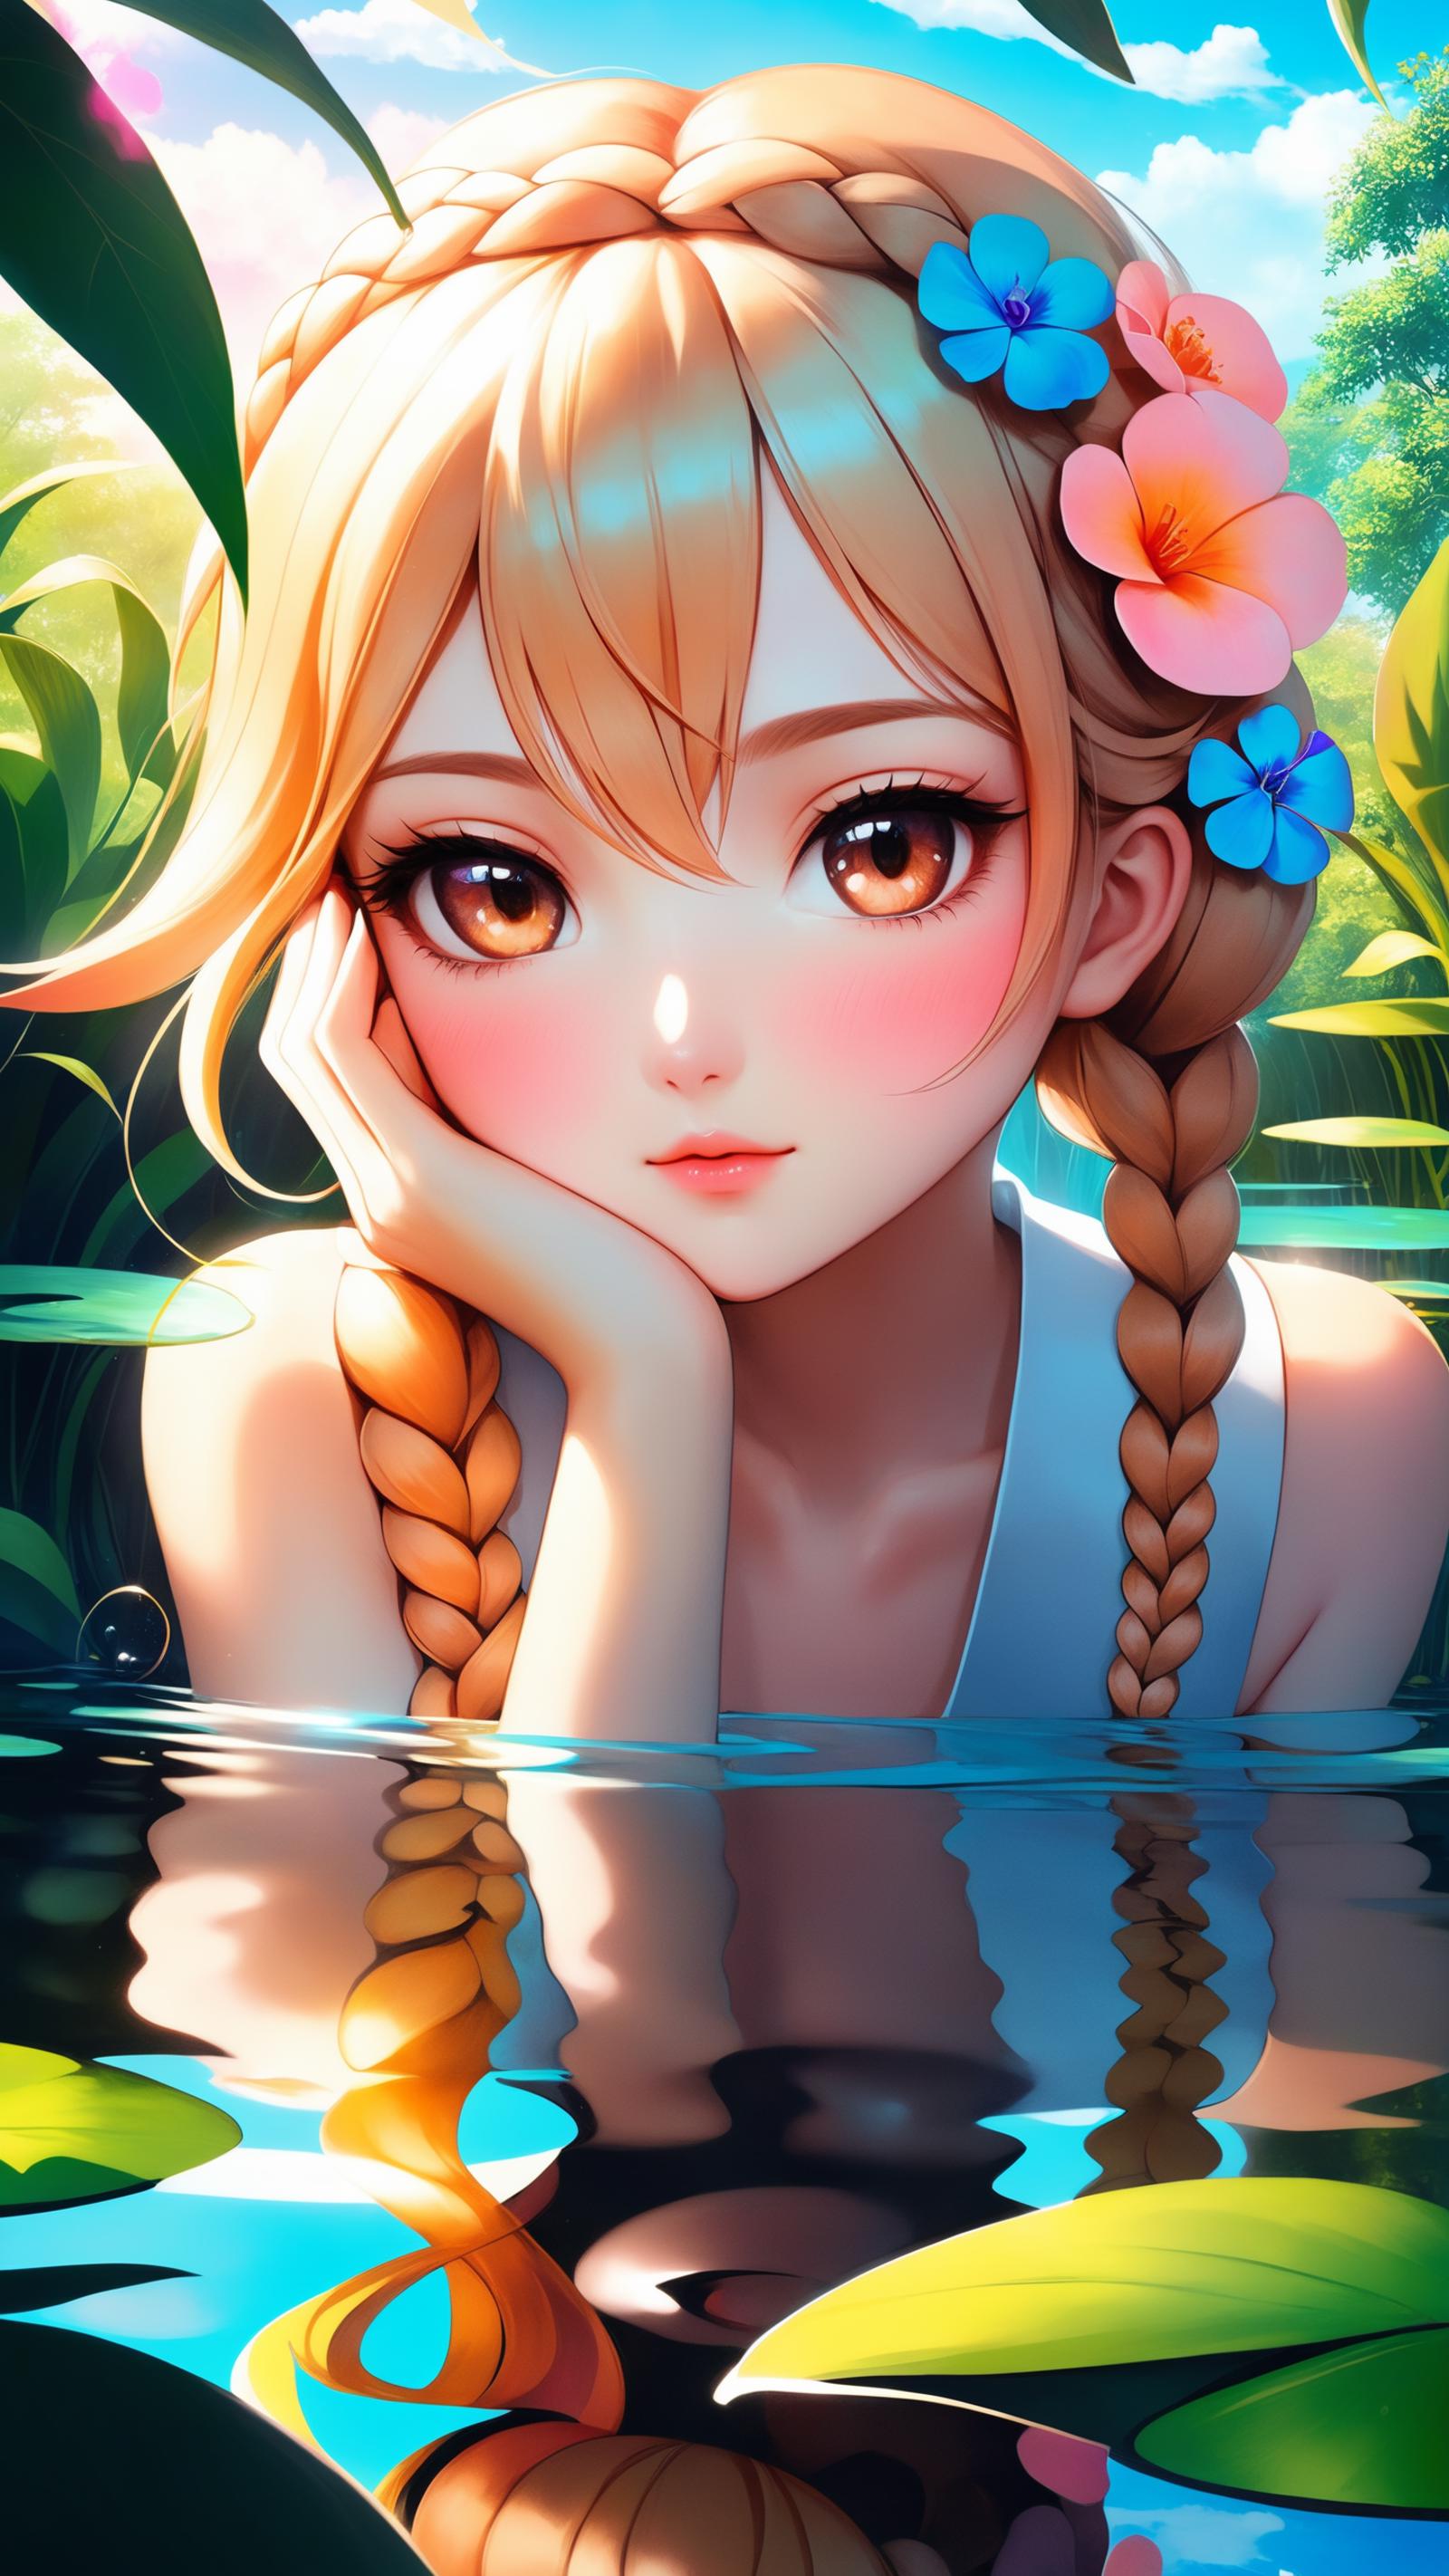 A young girl with pigtails and a flower in her hair, posing by a body of water.